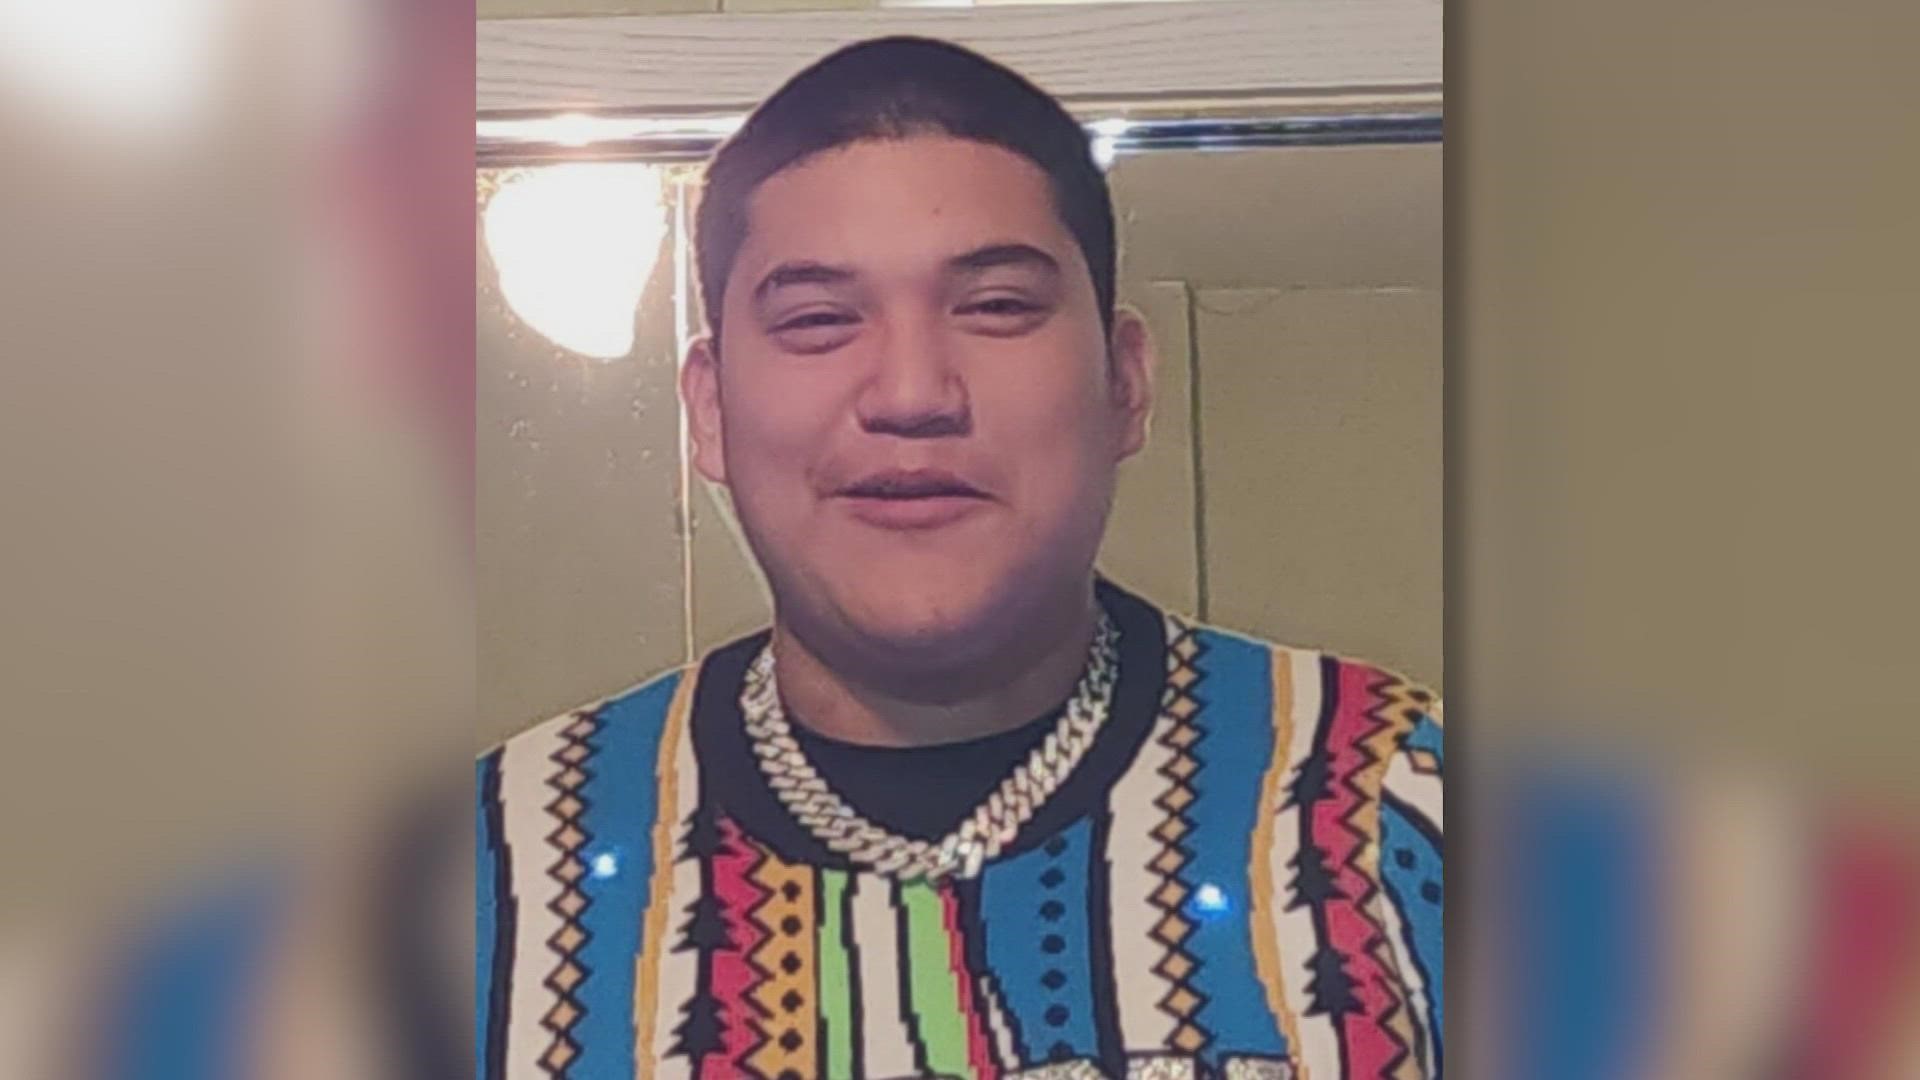 Zechariah Trevino was the teenager who was killed in a shooting across from Paschal High School in Fort Worth on Friday.